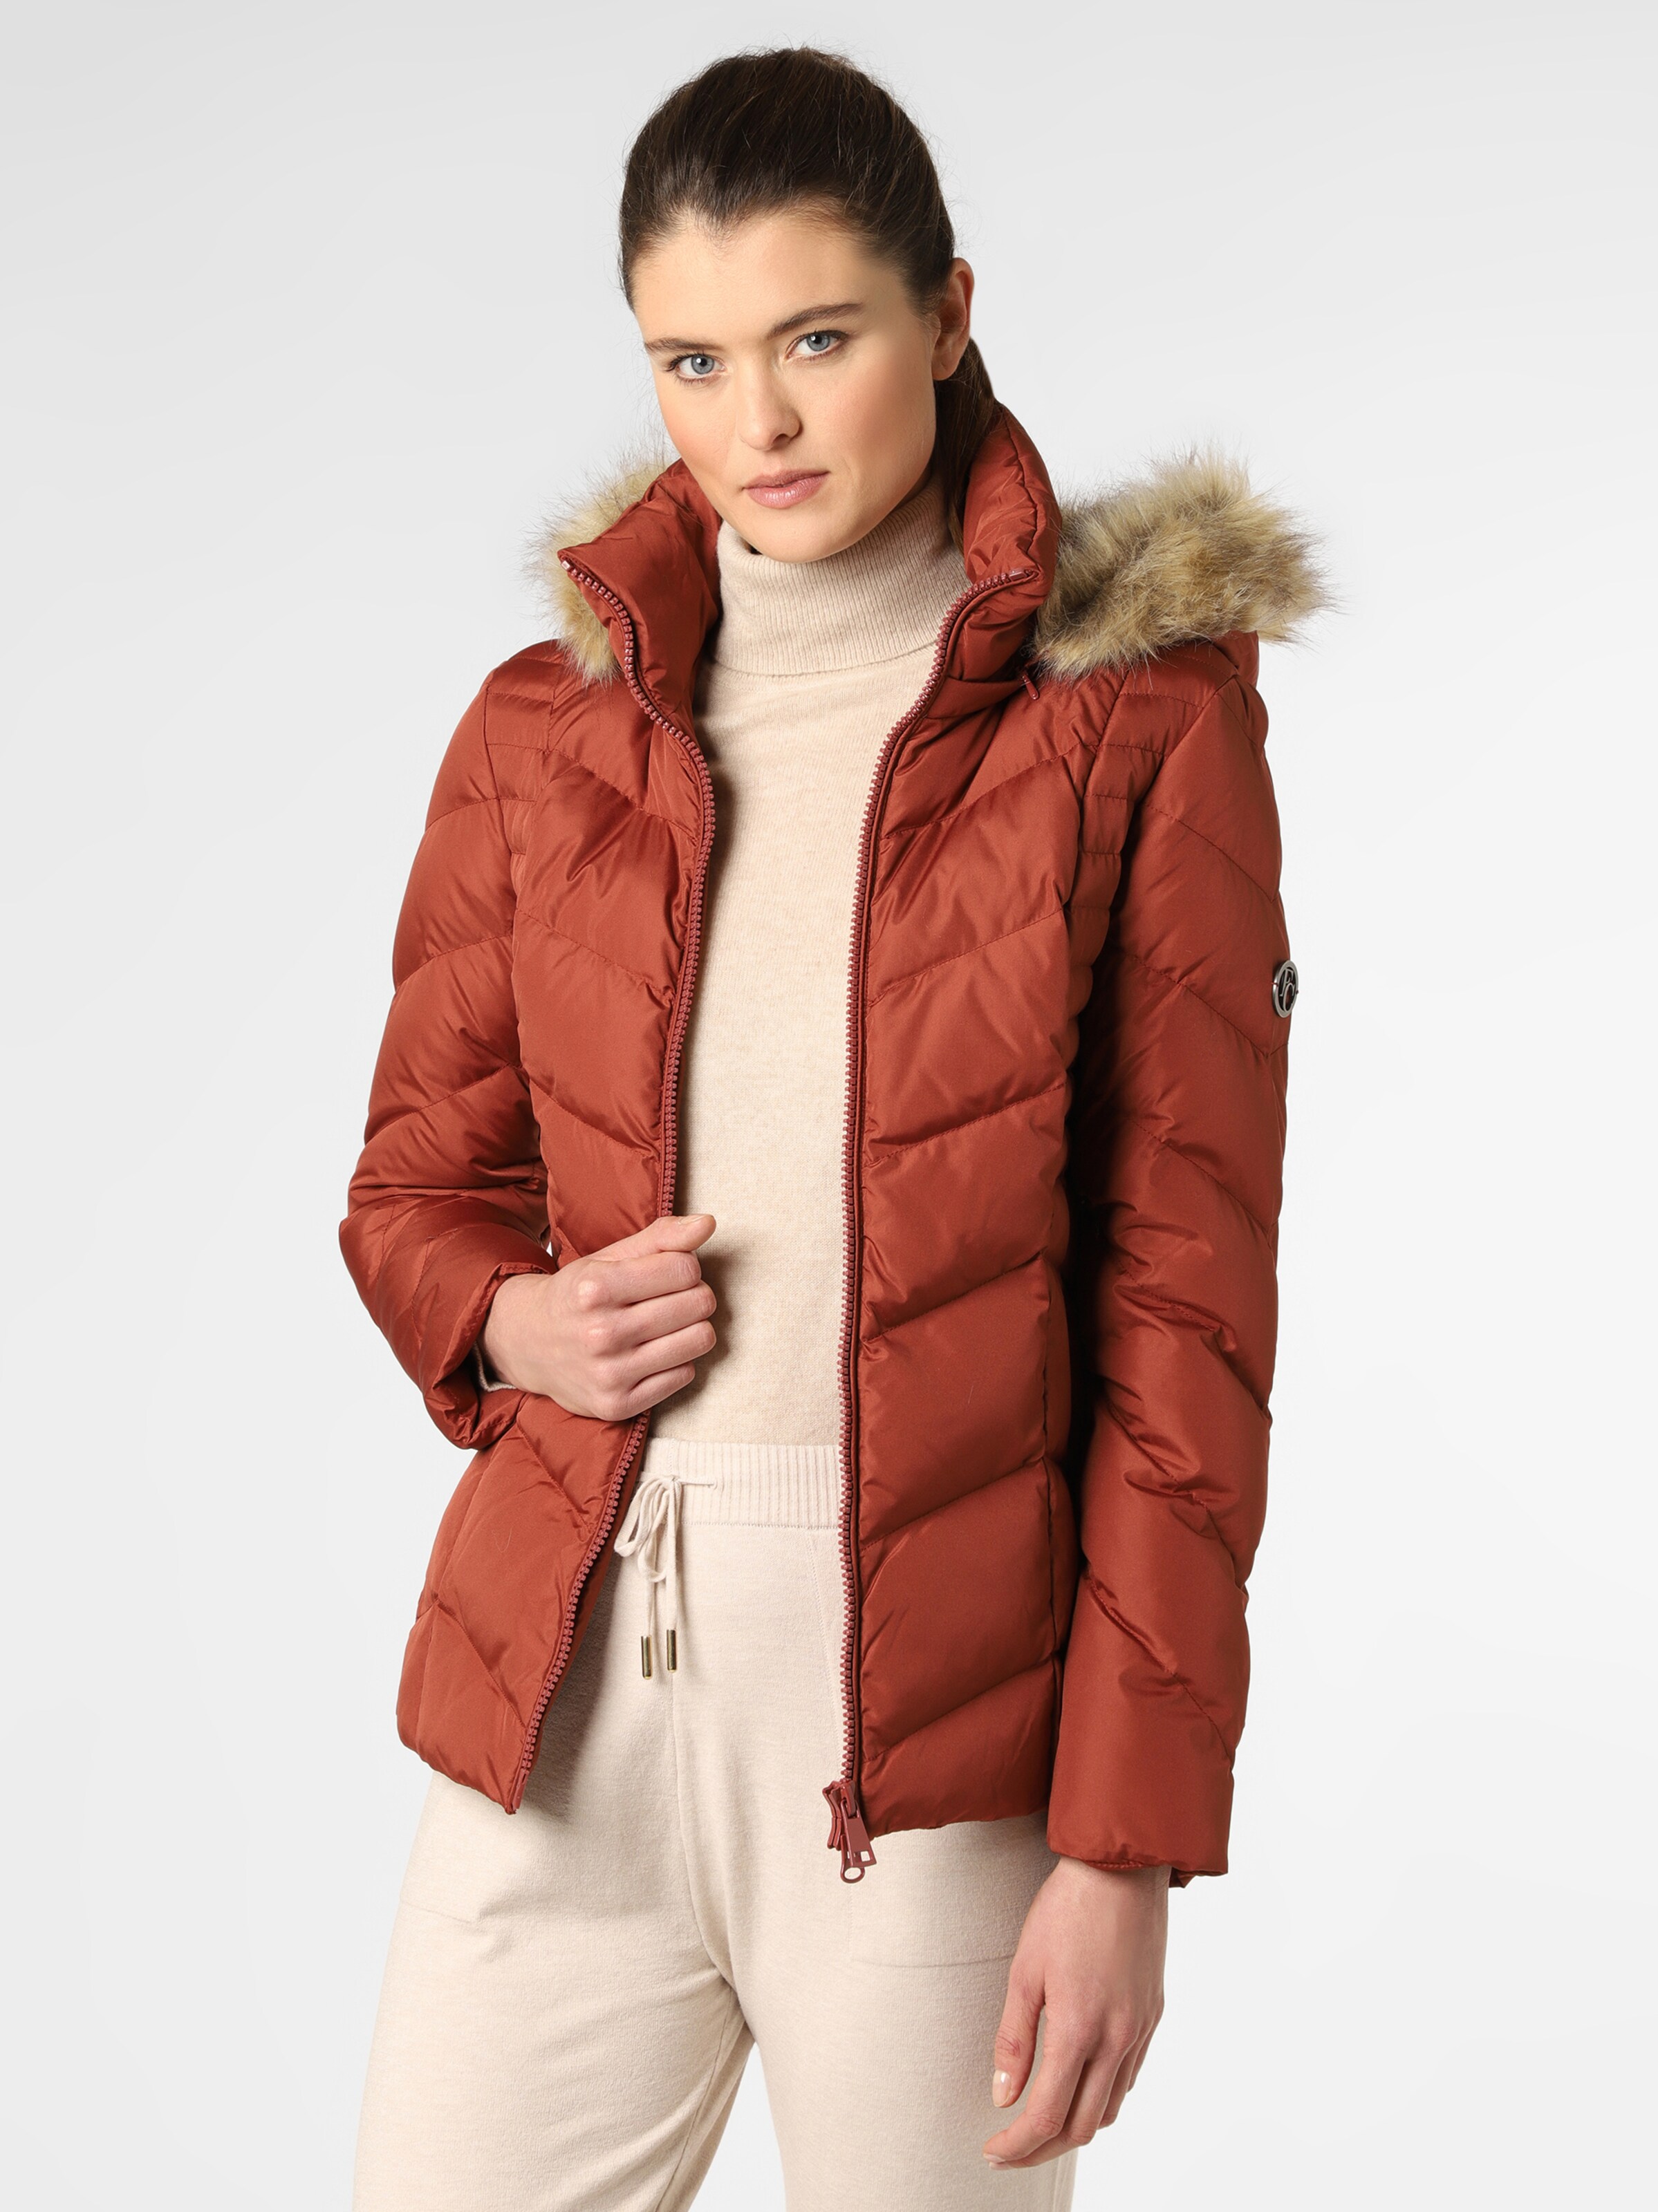 Fashion Jackets Outdoor Jackets Franco Callegari Outdoor Jacket natural white quilting pattern casual look 